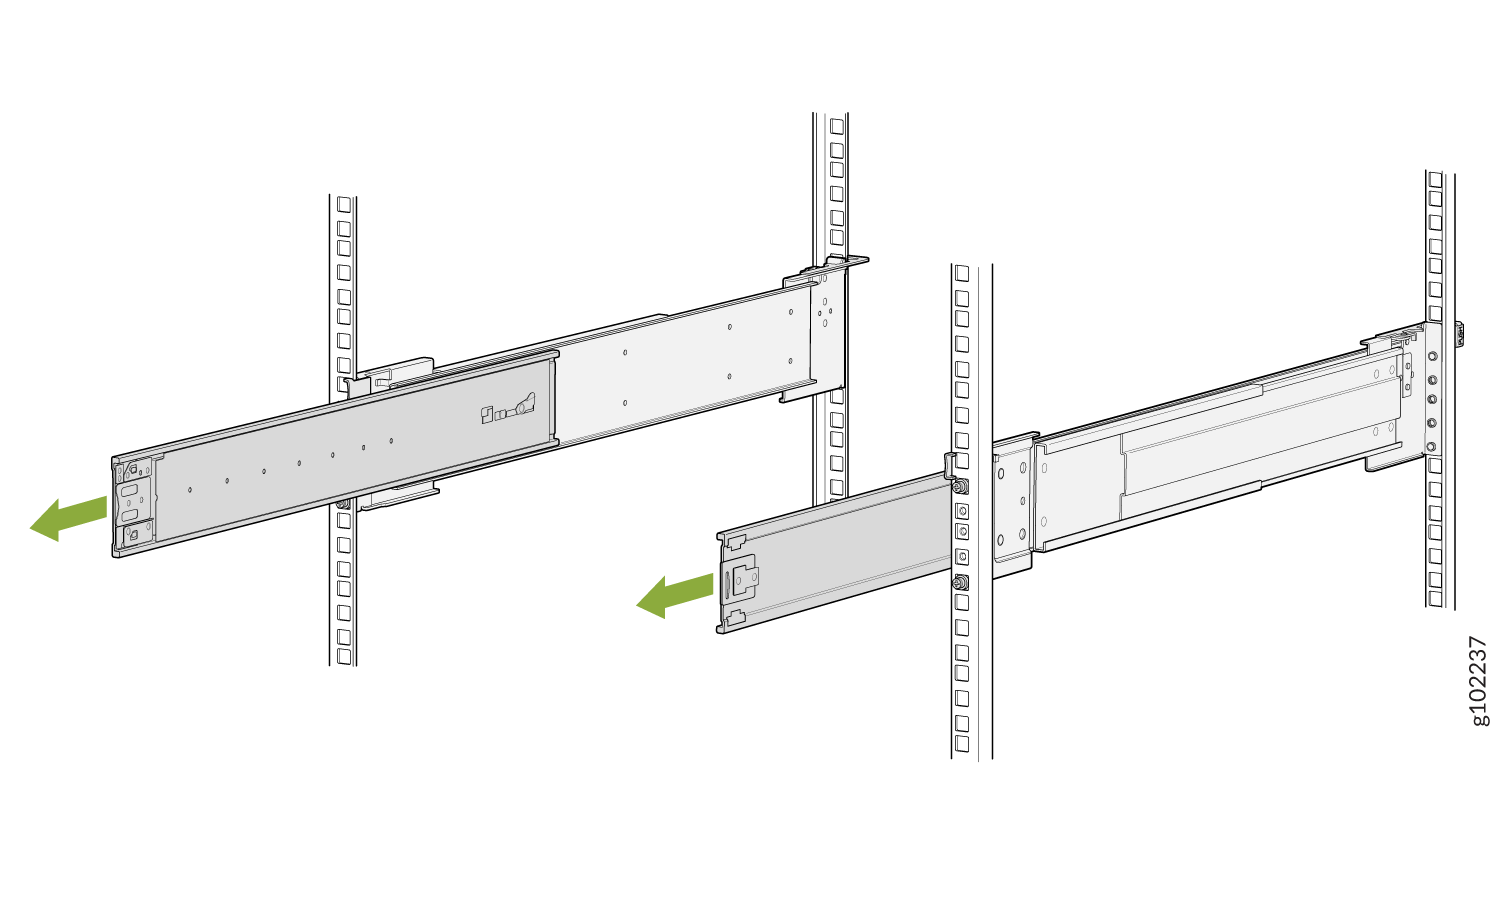 Extend the Middle Telescopic Rails